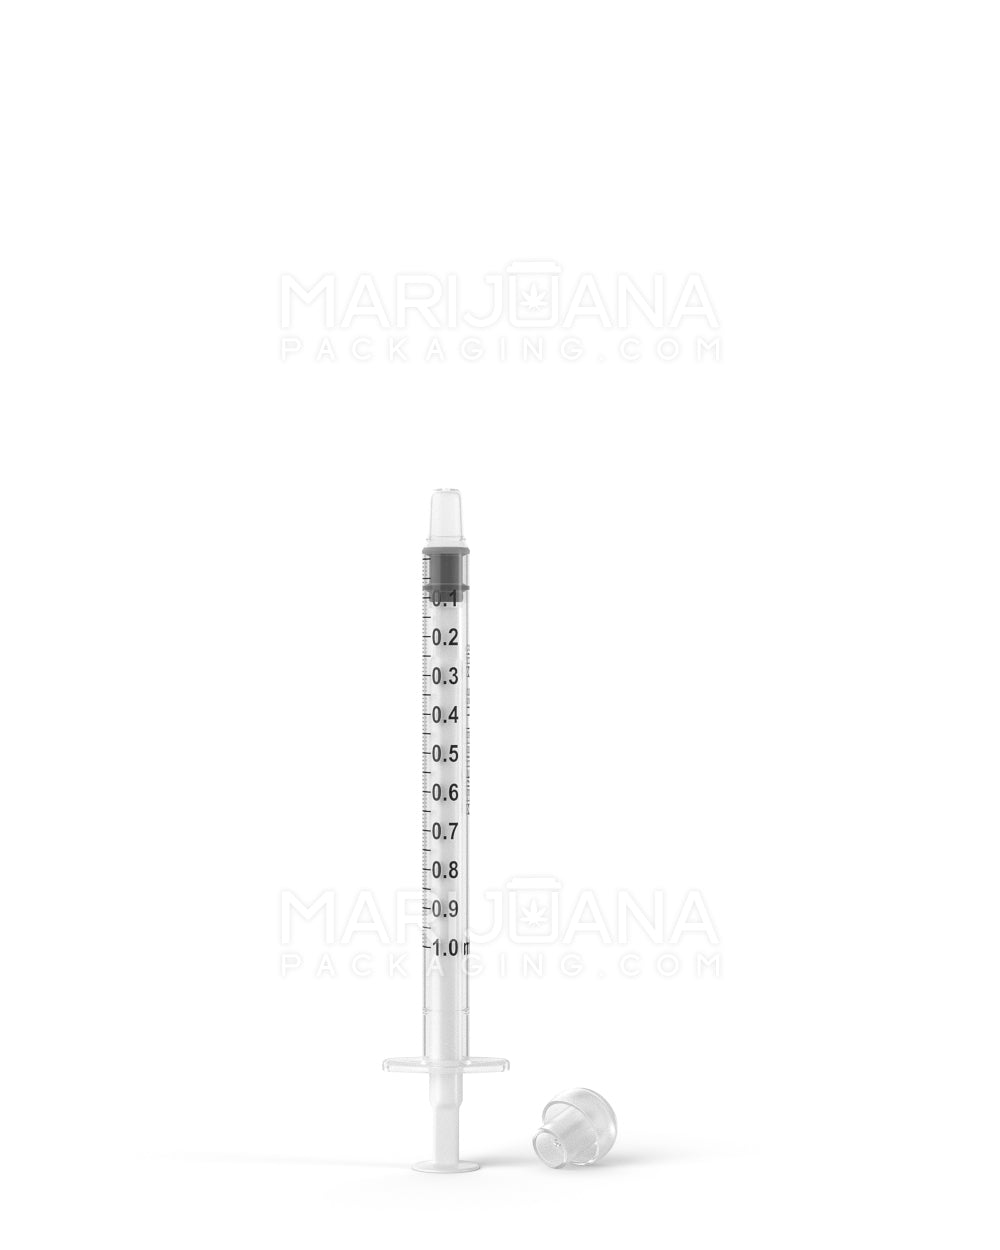 Plastic Oral Concentrate Syringes | 1mL - 0.1mL Increments - 100 Count - 9